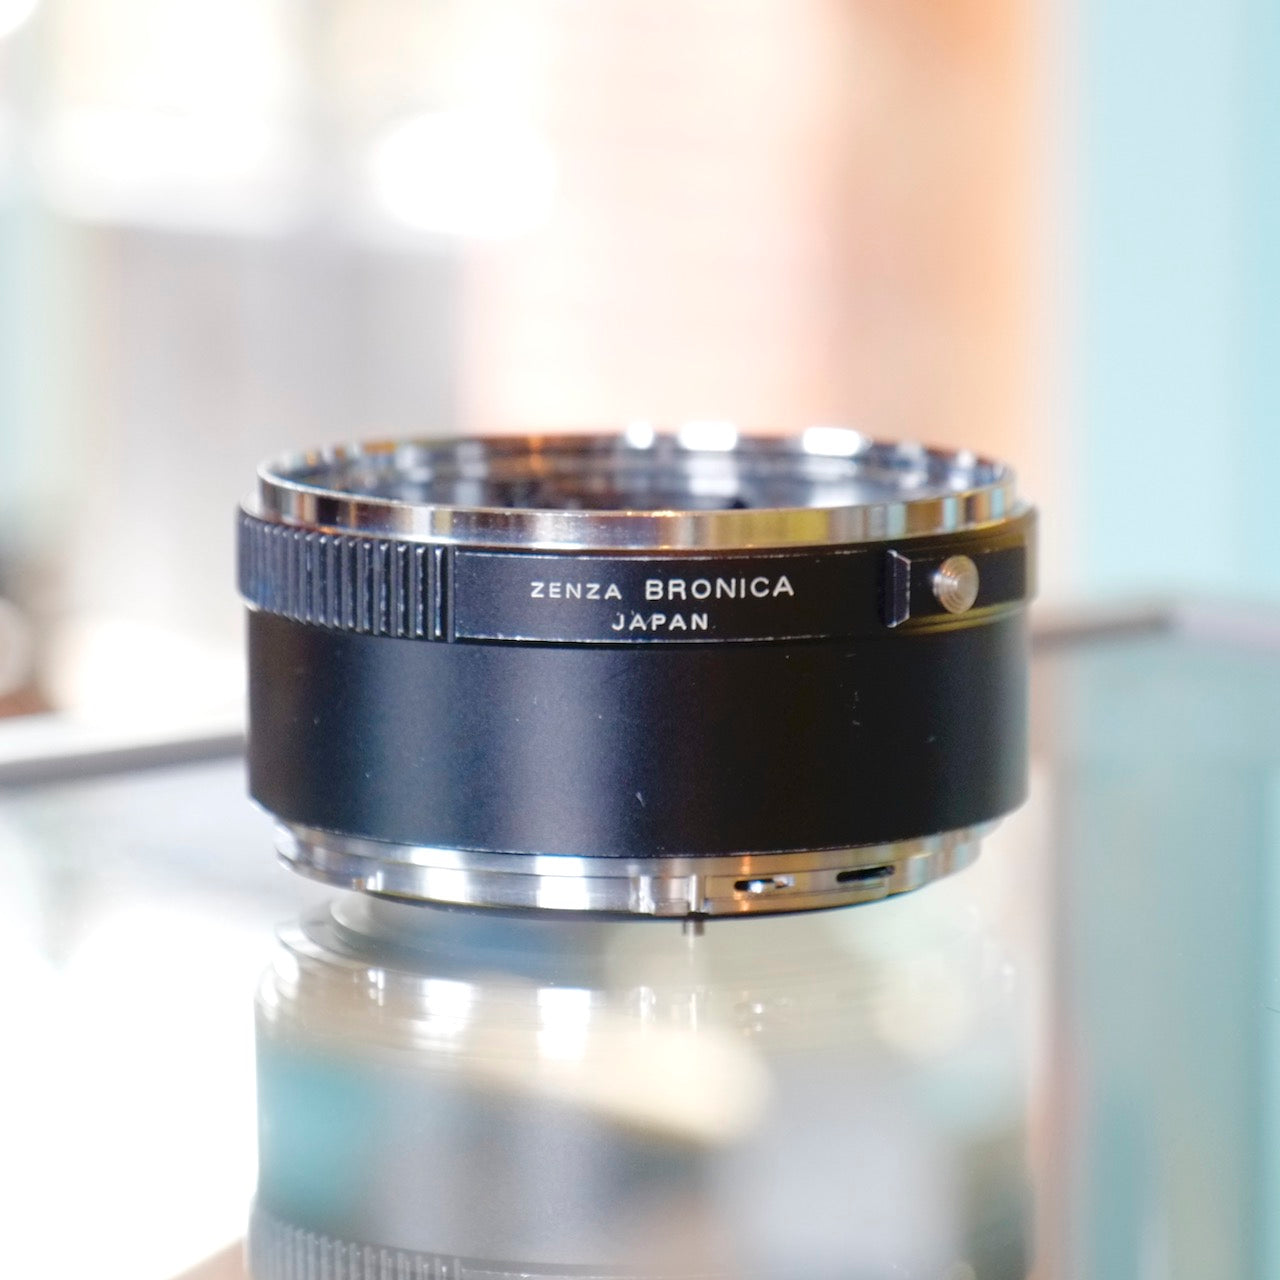 Zenza Bronica G-36 extension tube for GS-1